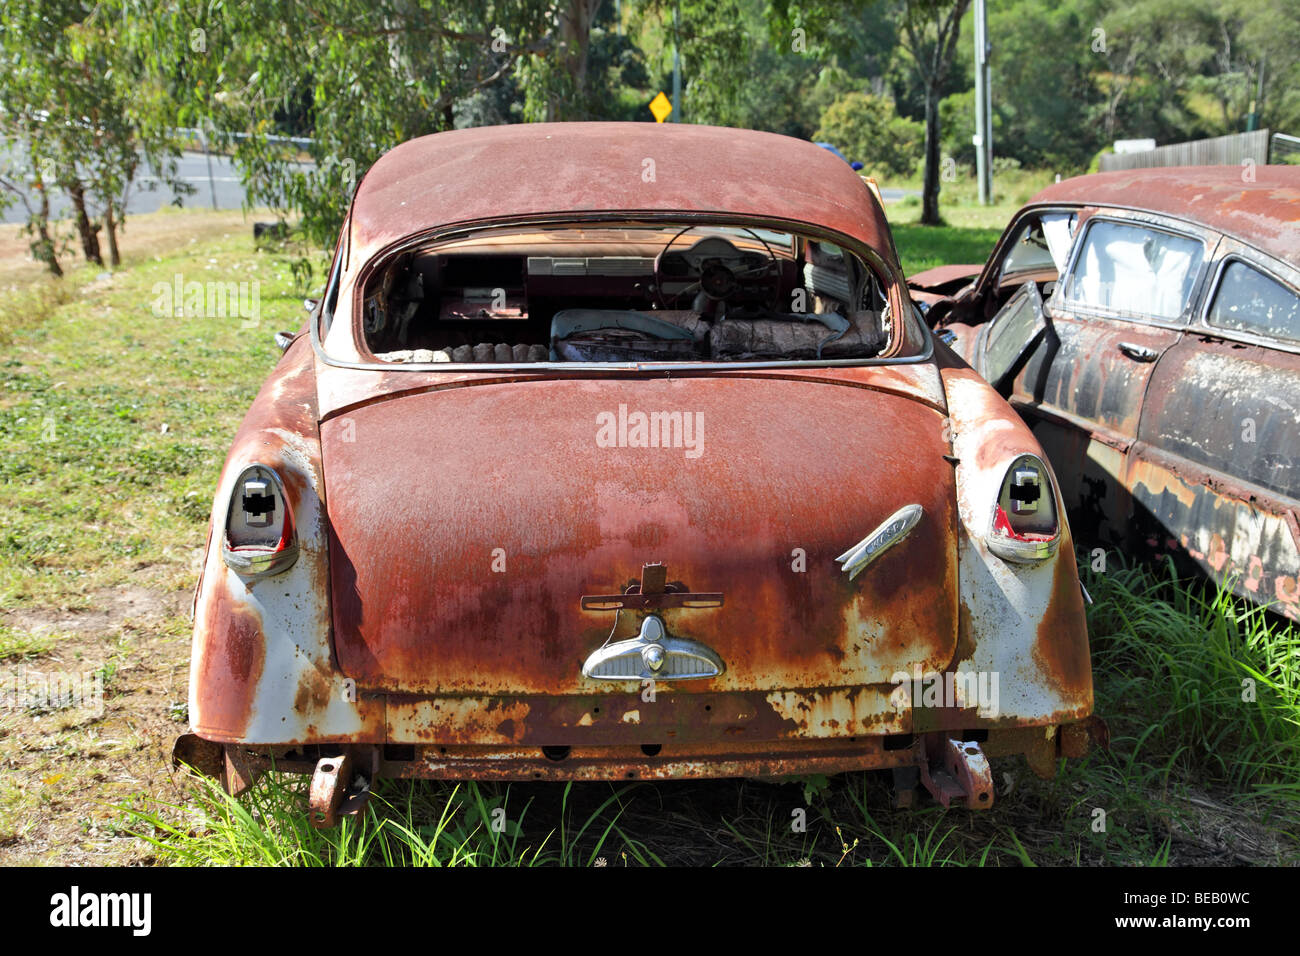 Rusted old cars in a grassy field Hudson Super Swift Stock Photo